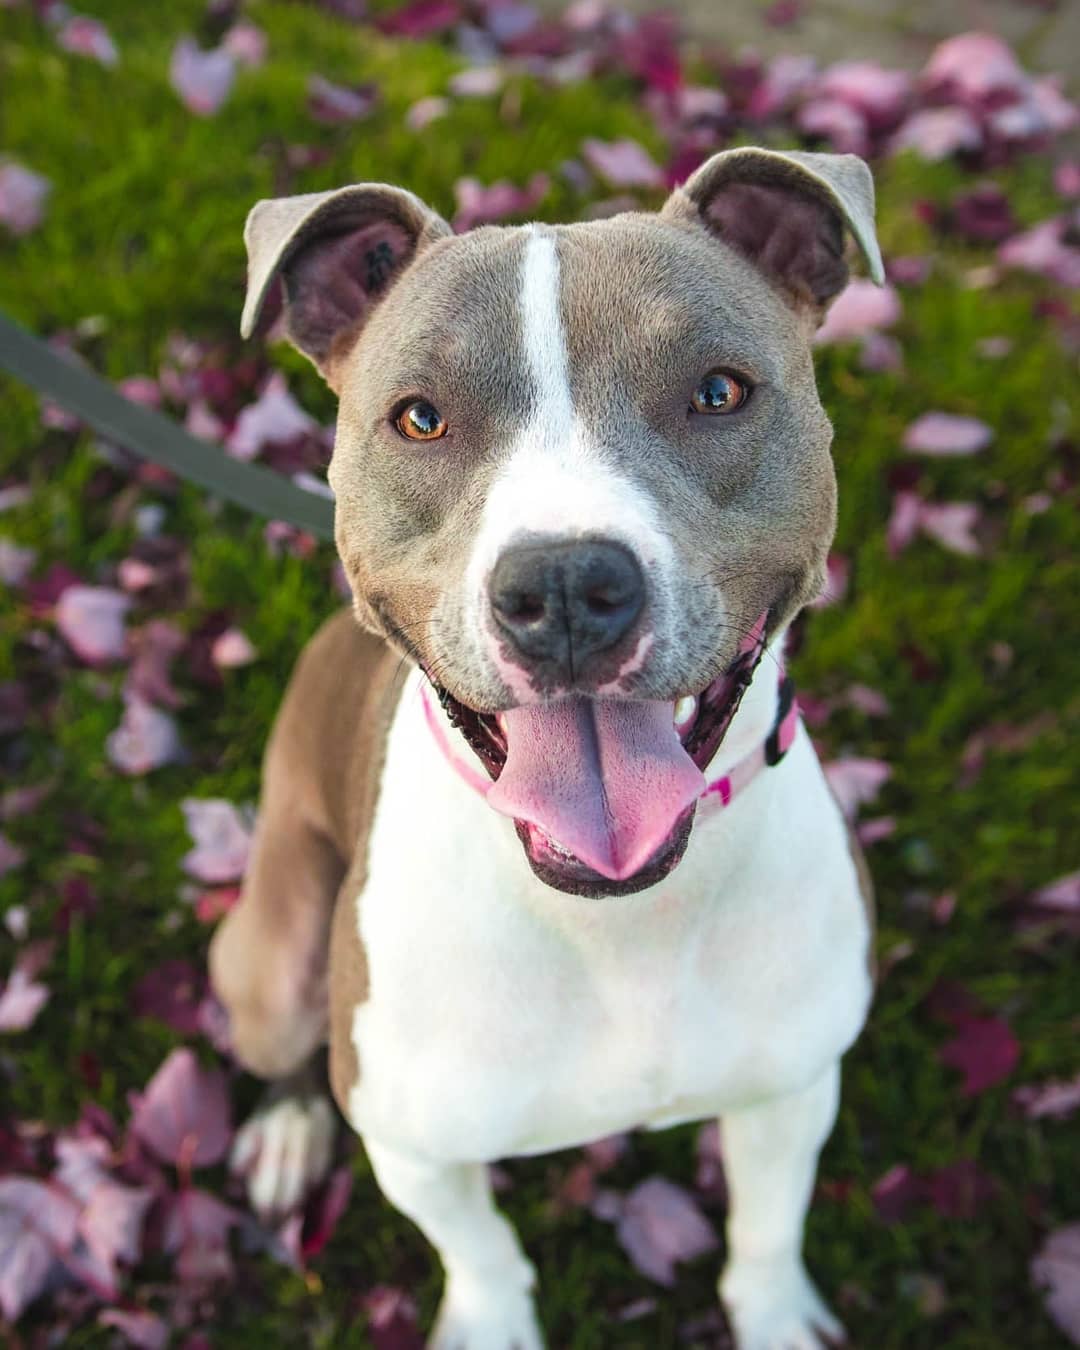 Pit Bull sitting in the field of purple flowers while looking up and smiling